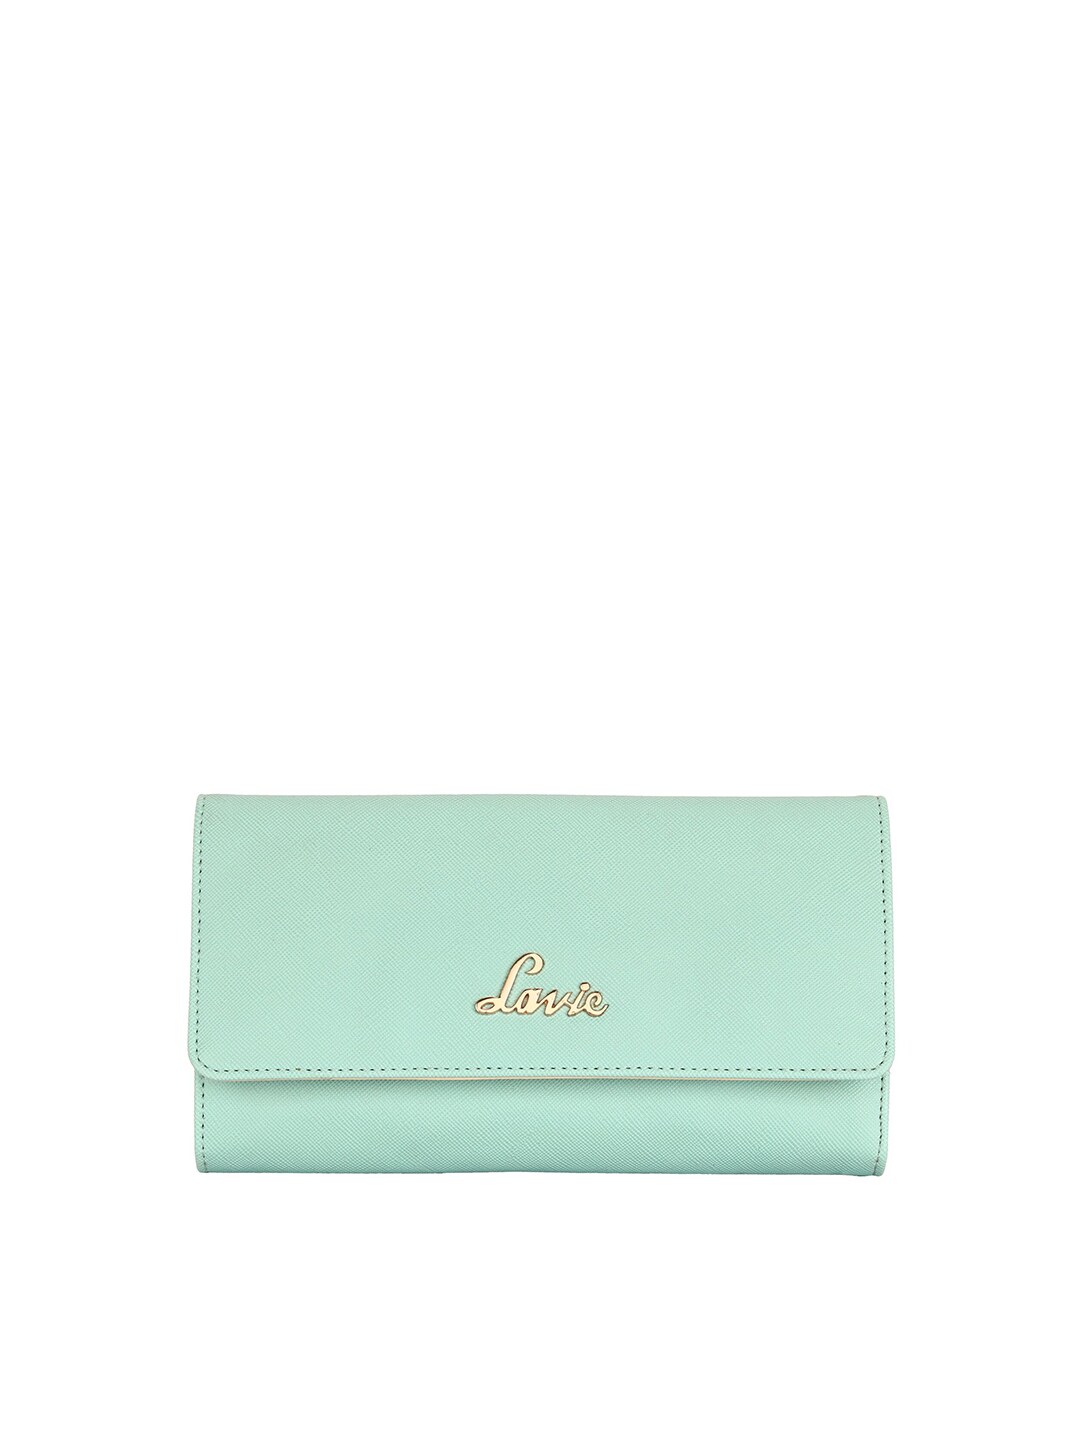 Lavie Women Green & Gold-Toned Textured PU Envelope Price in India